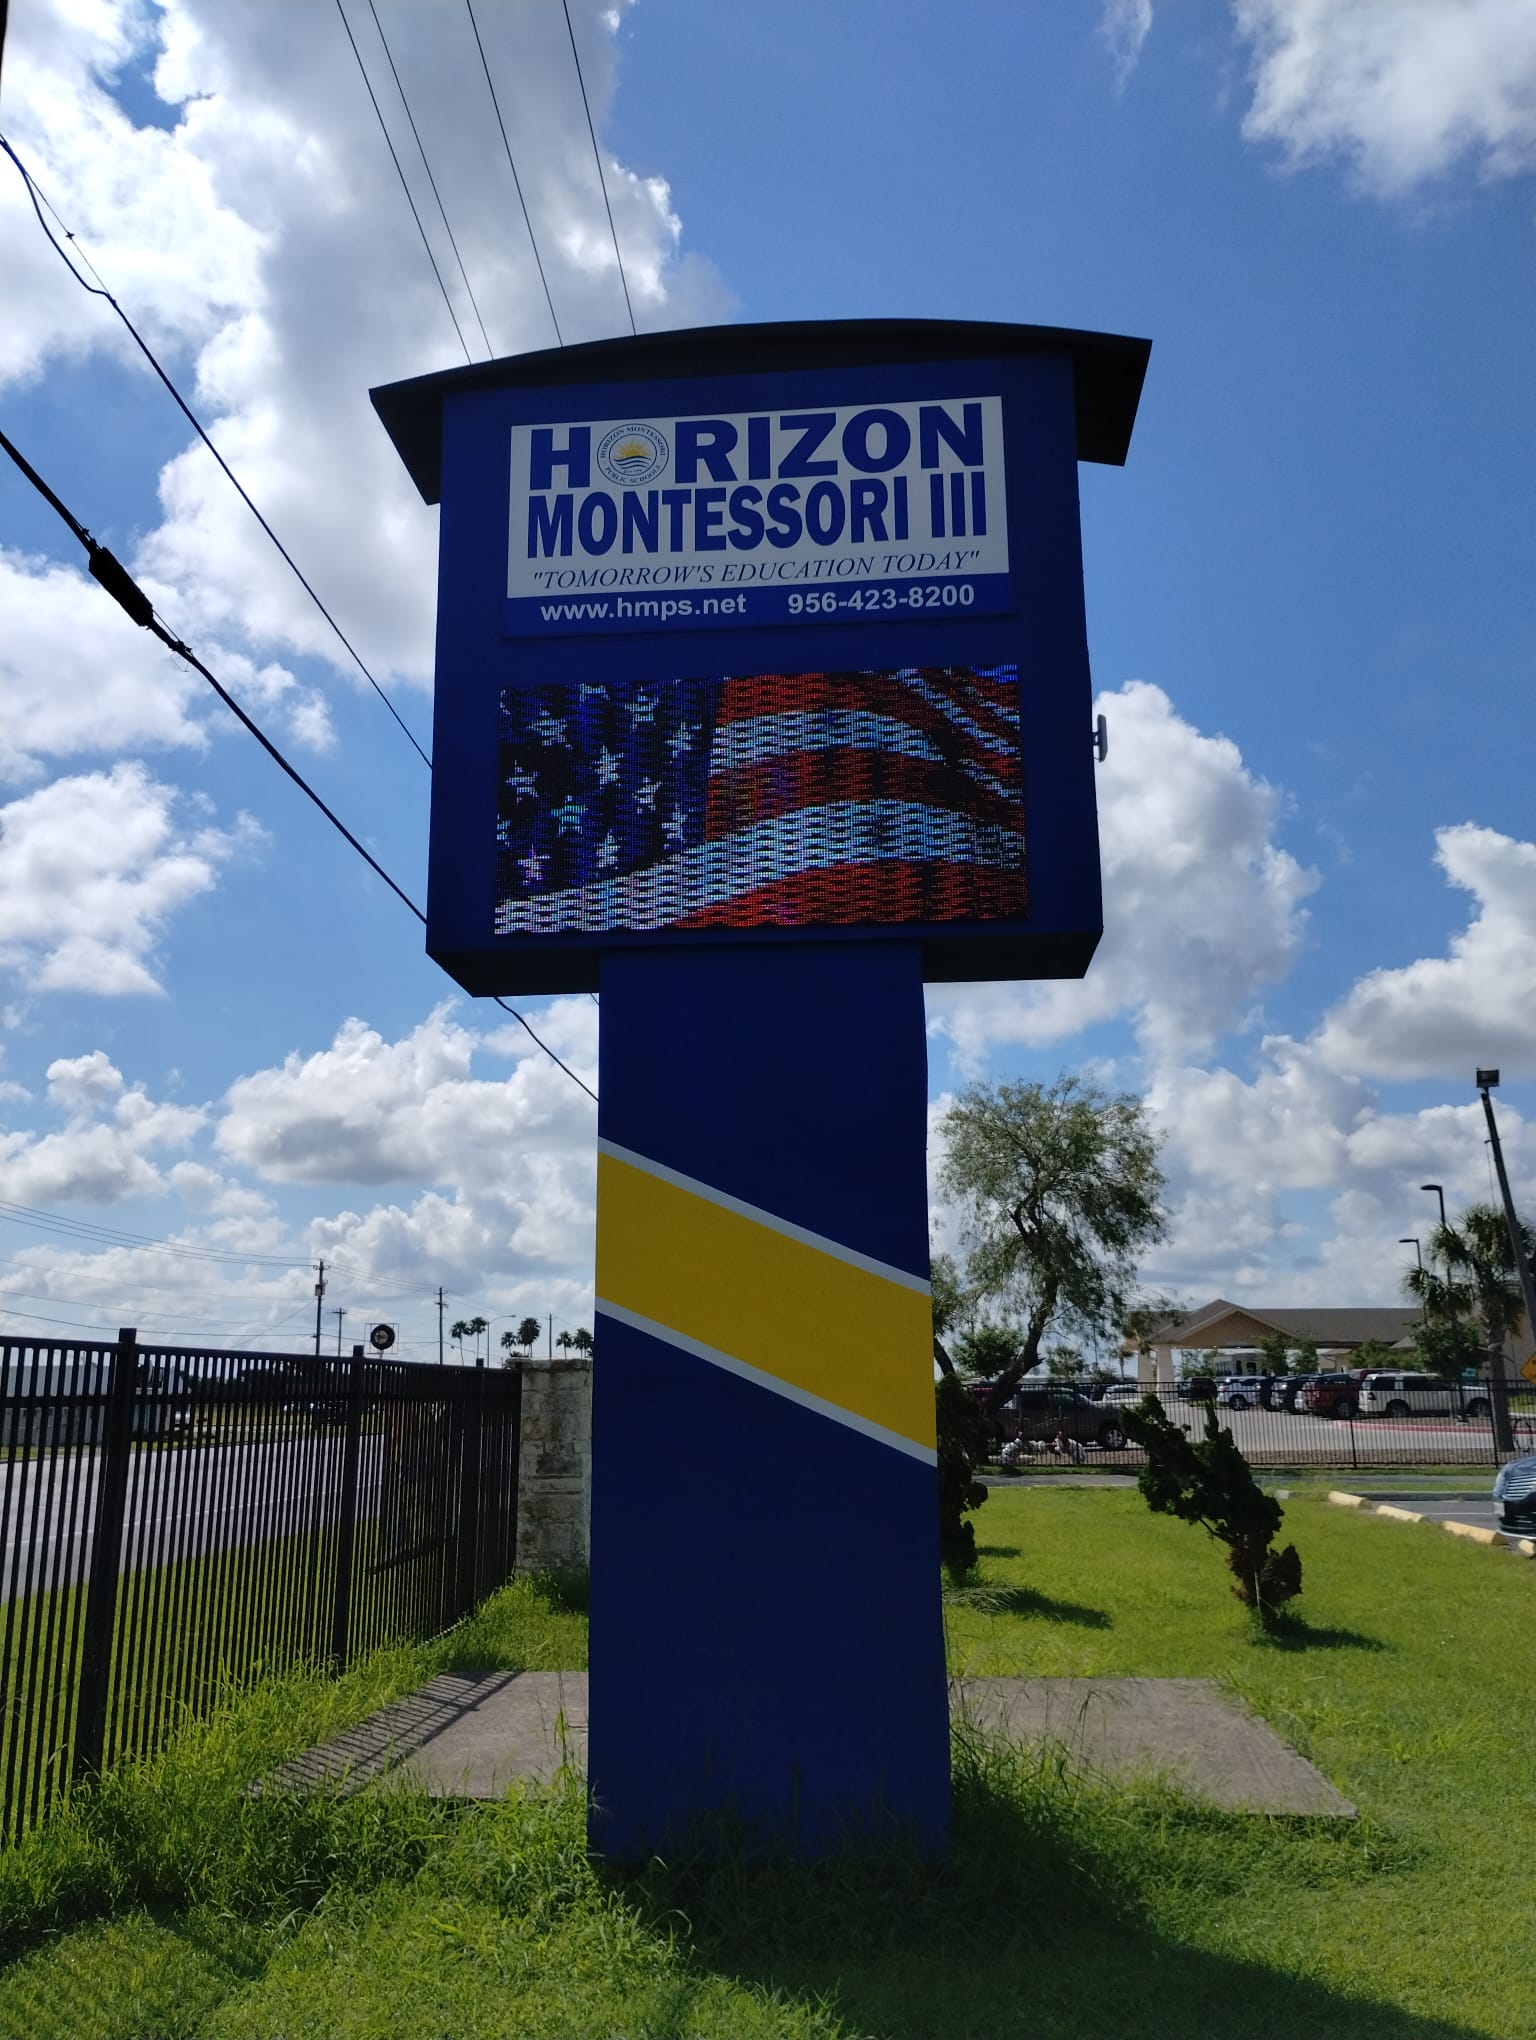 Designed and installed an LED display for Horizon Montessori to modernize school communication and presence.